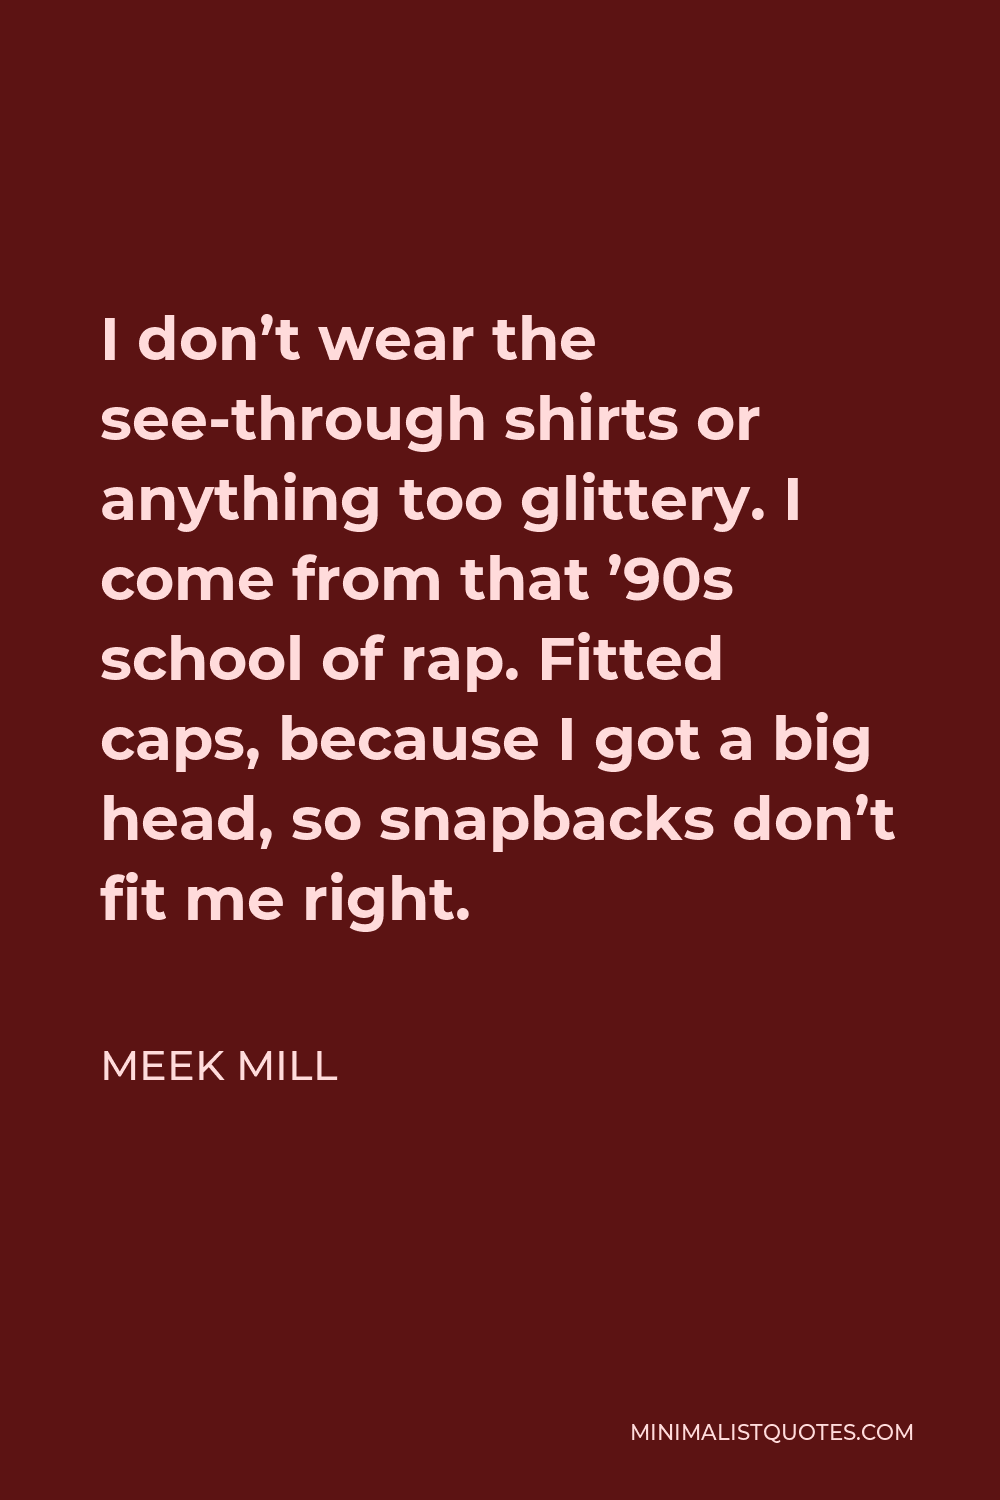 Meek Mill Quote - I don’t wear the see-through shirts or anything too glittery. I come from that ’90s school of rap. Fitted caps, because I got a big head, so snapbacks don’t fit me right.